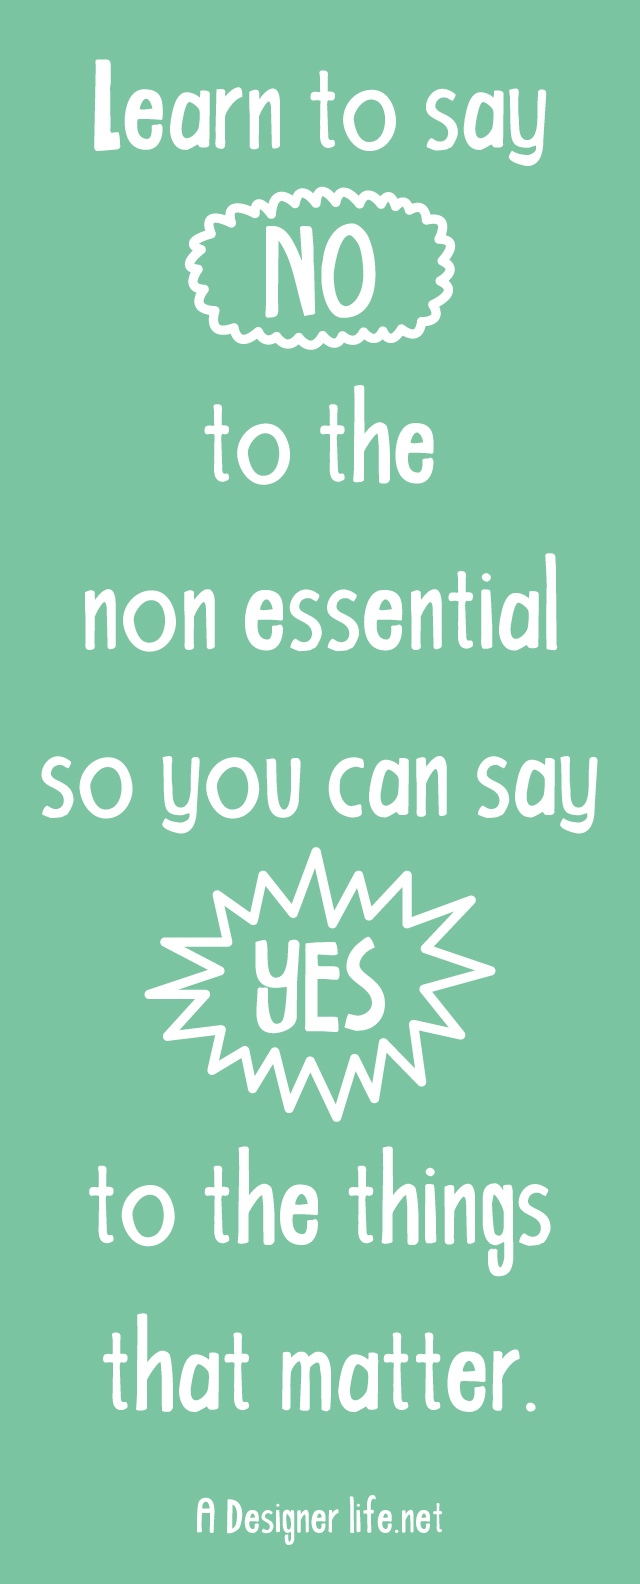 Learn to say NO to the non essential so you can say YES to the things that matter | inspirational quote